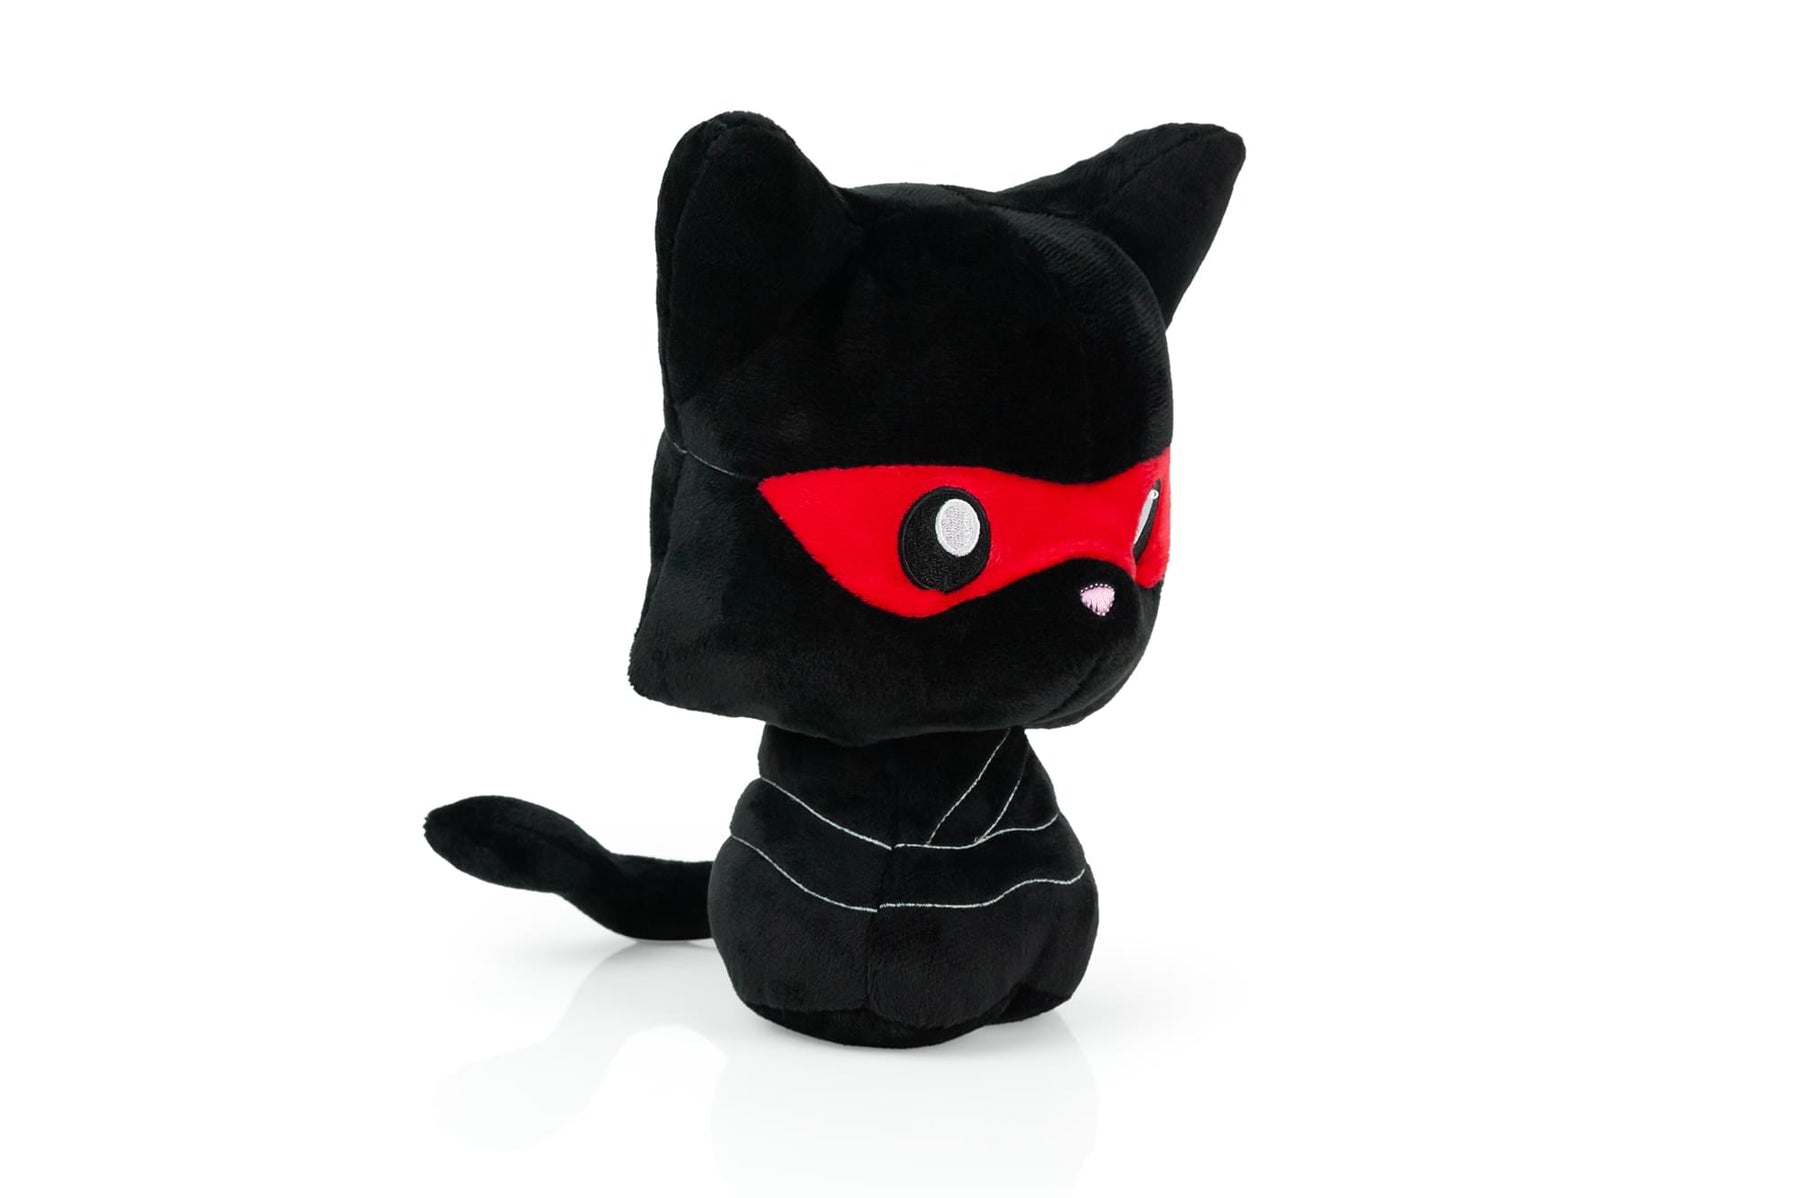 Tentacle Kitty 2nd Edition Ninja Kitty Plush Collectible | Measures 8 Inches Tall